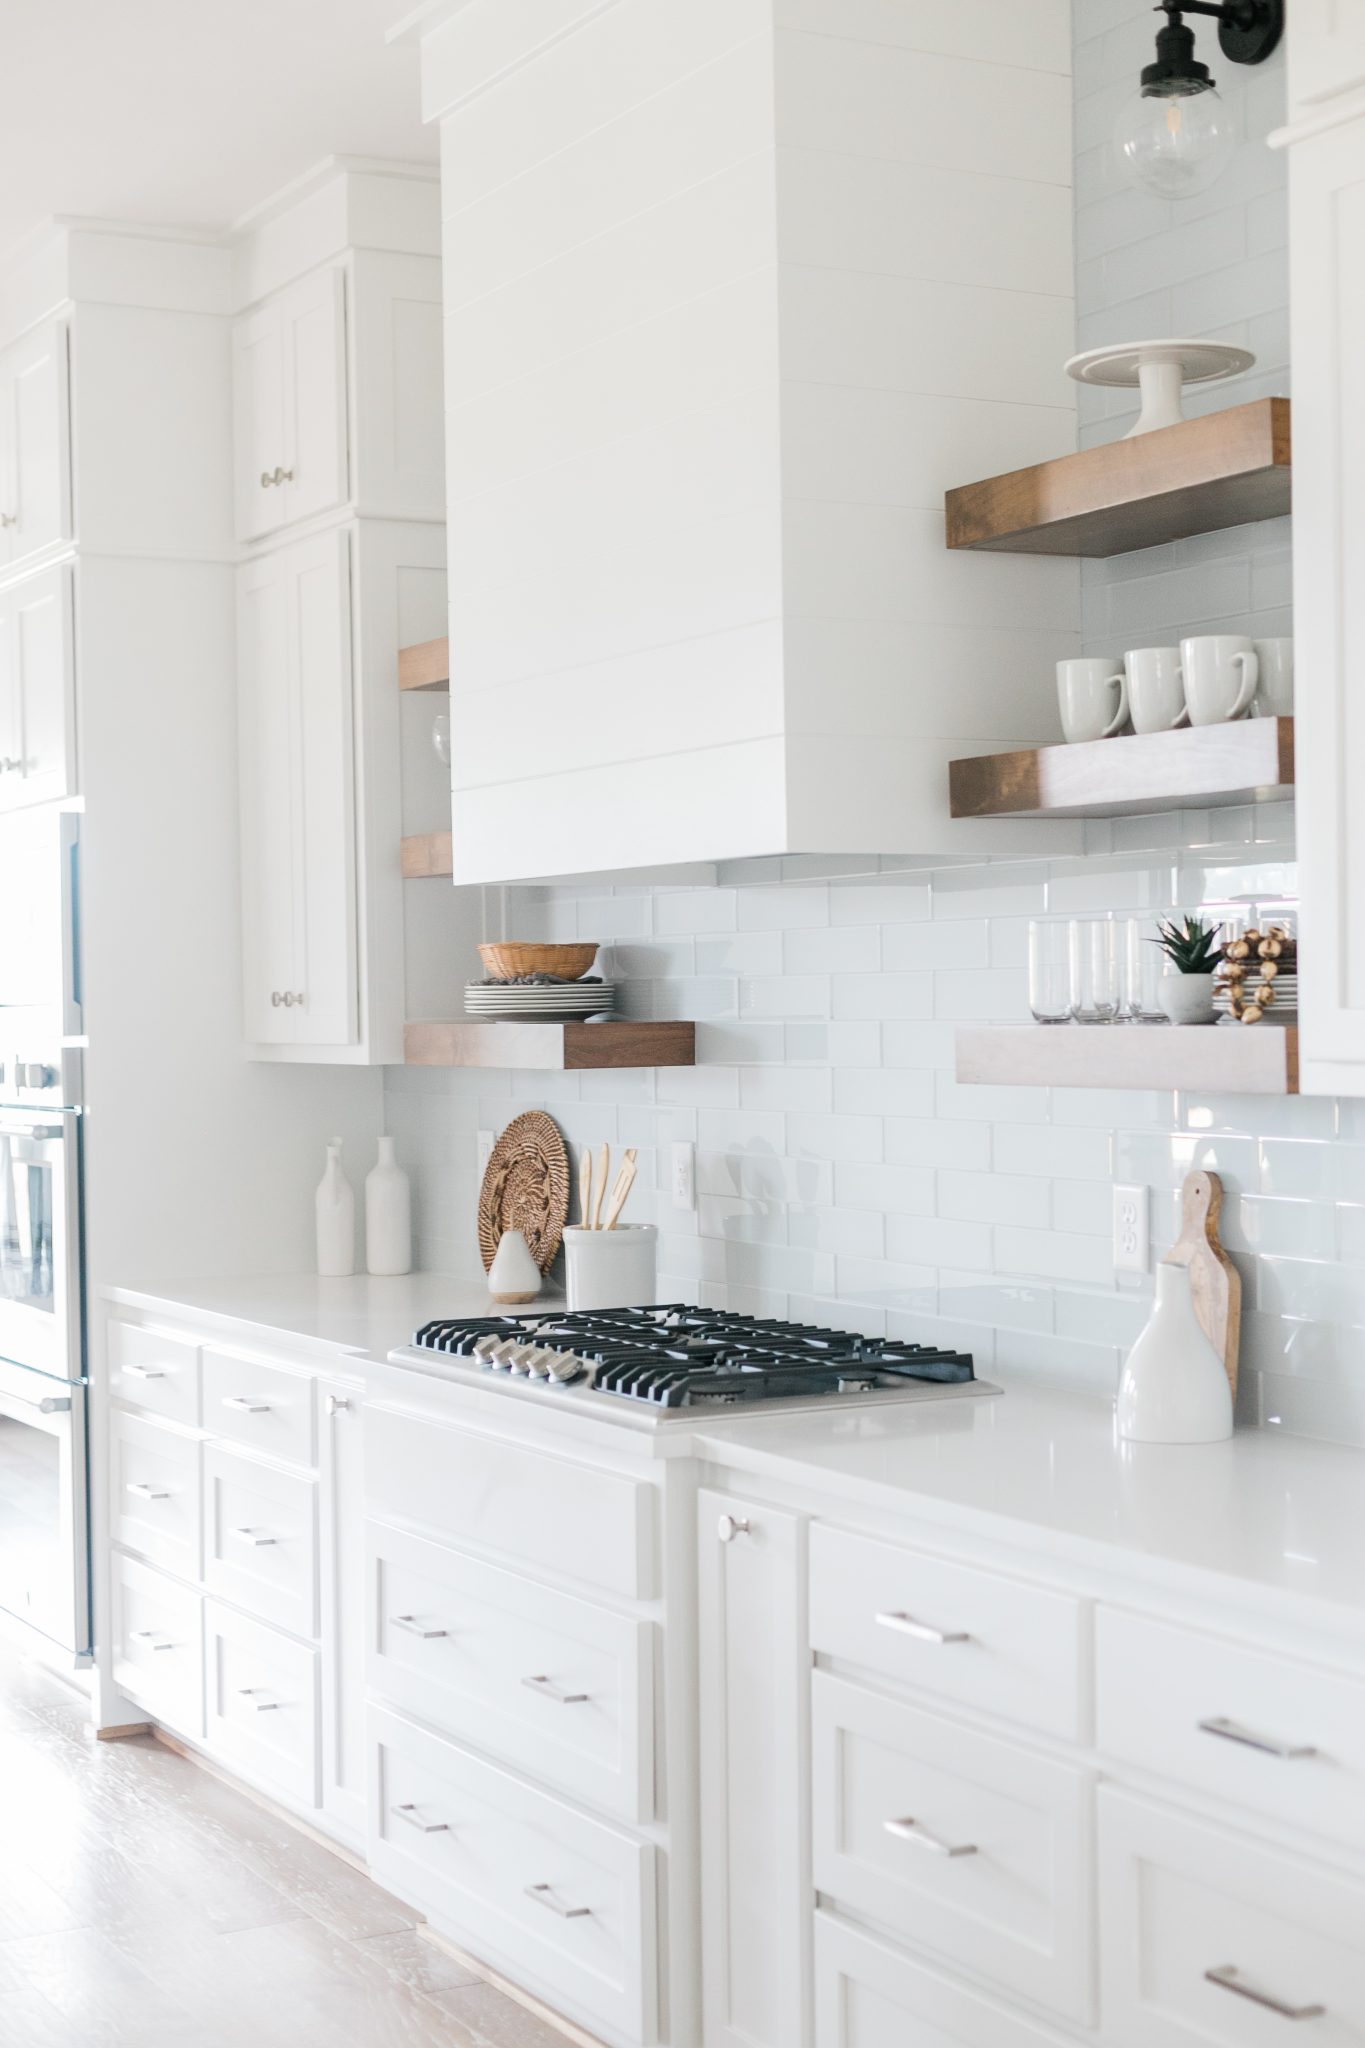 Styling Open Shelving in the Kitchen